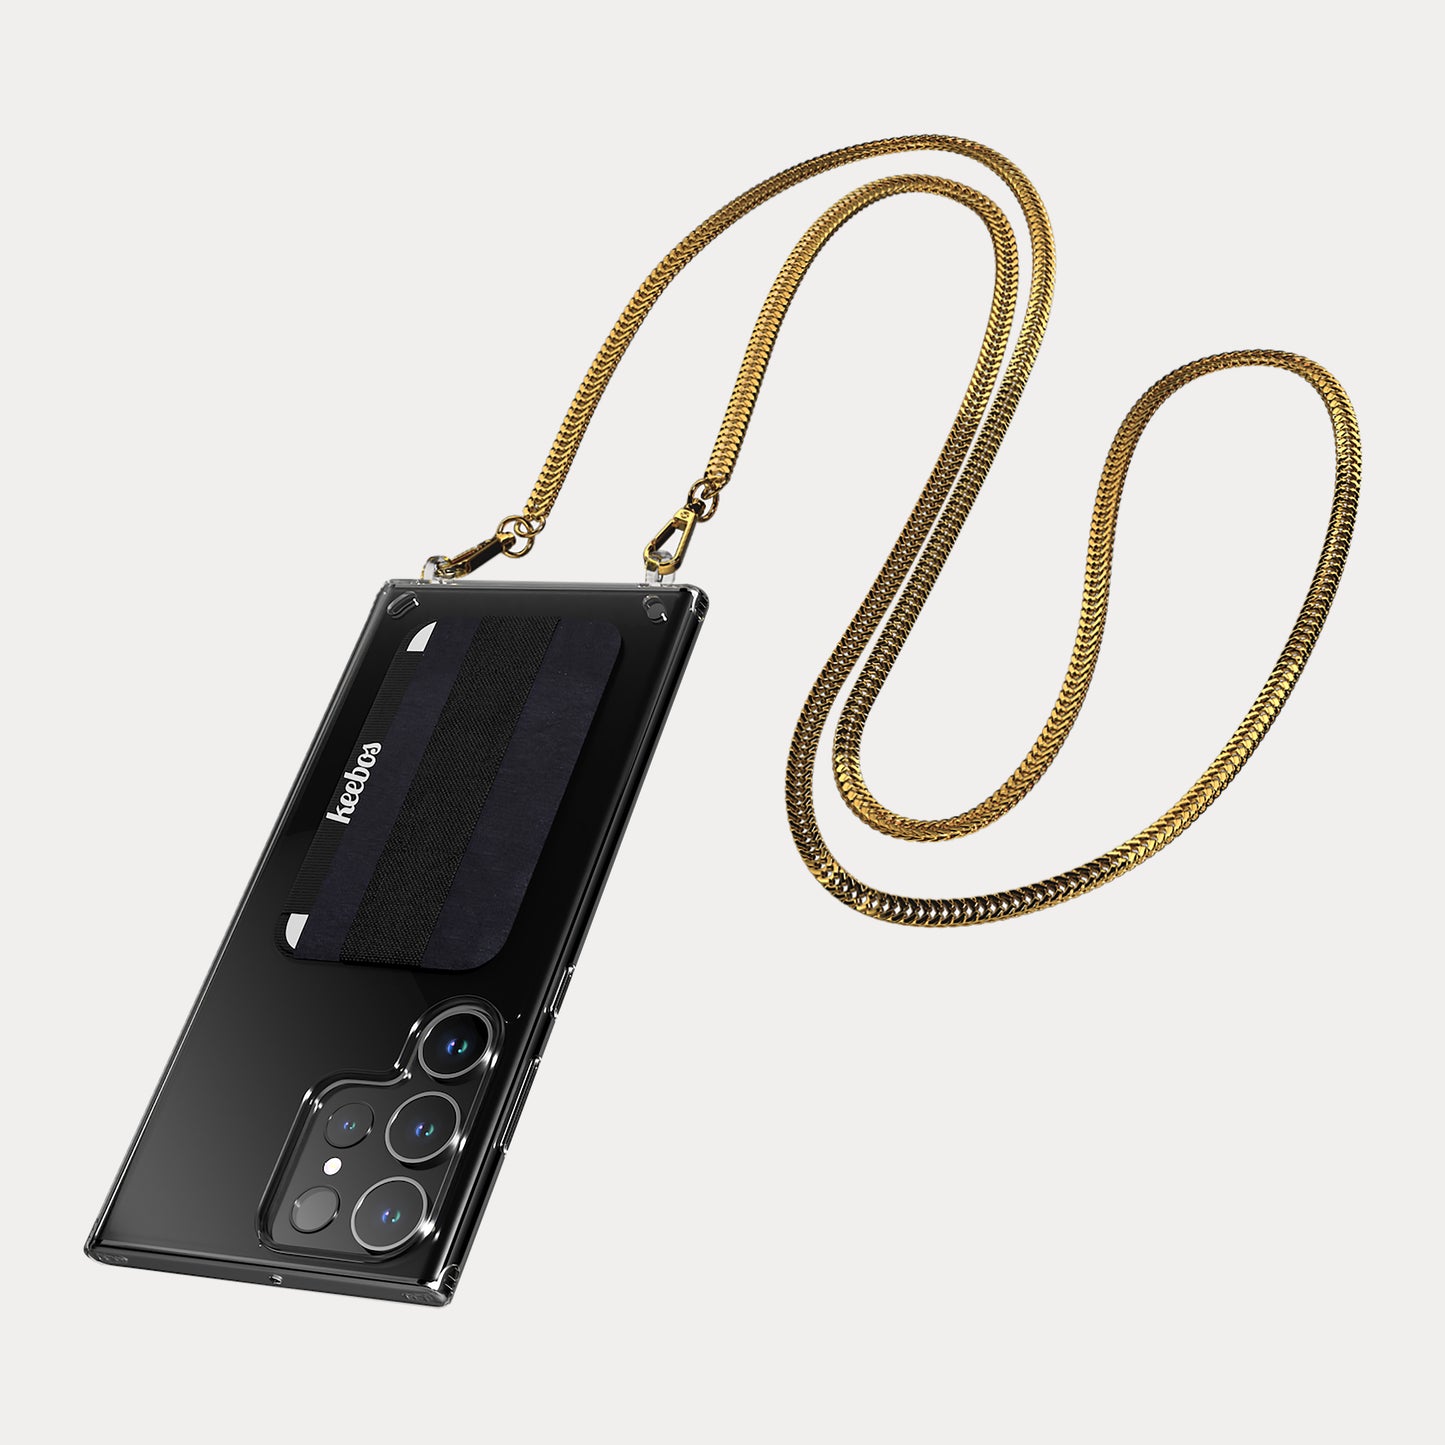 phone-case-with-gold-chain-for-samsung-galaxy-keebos